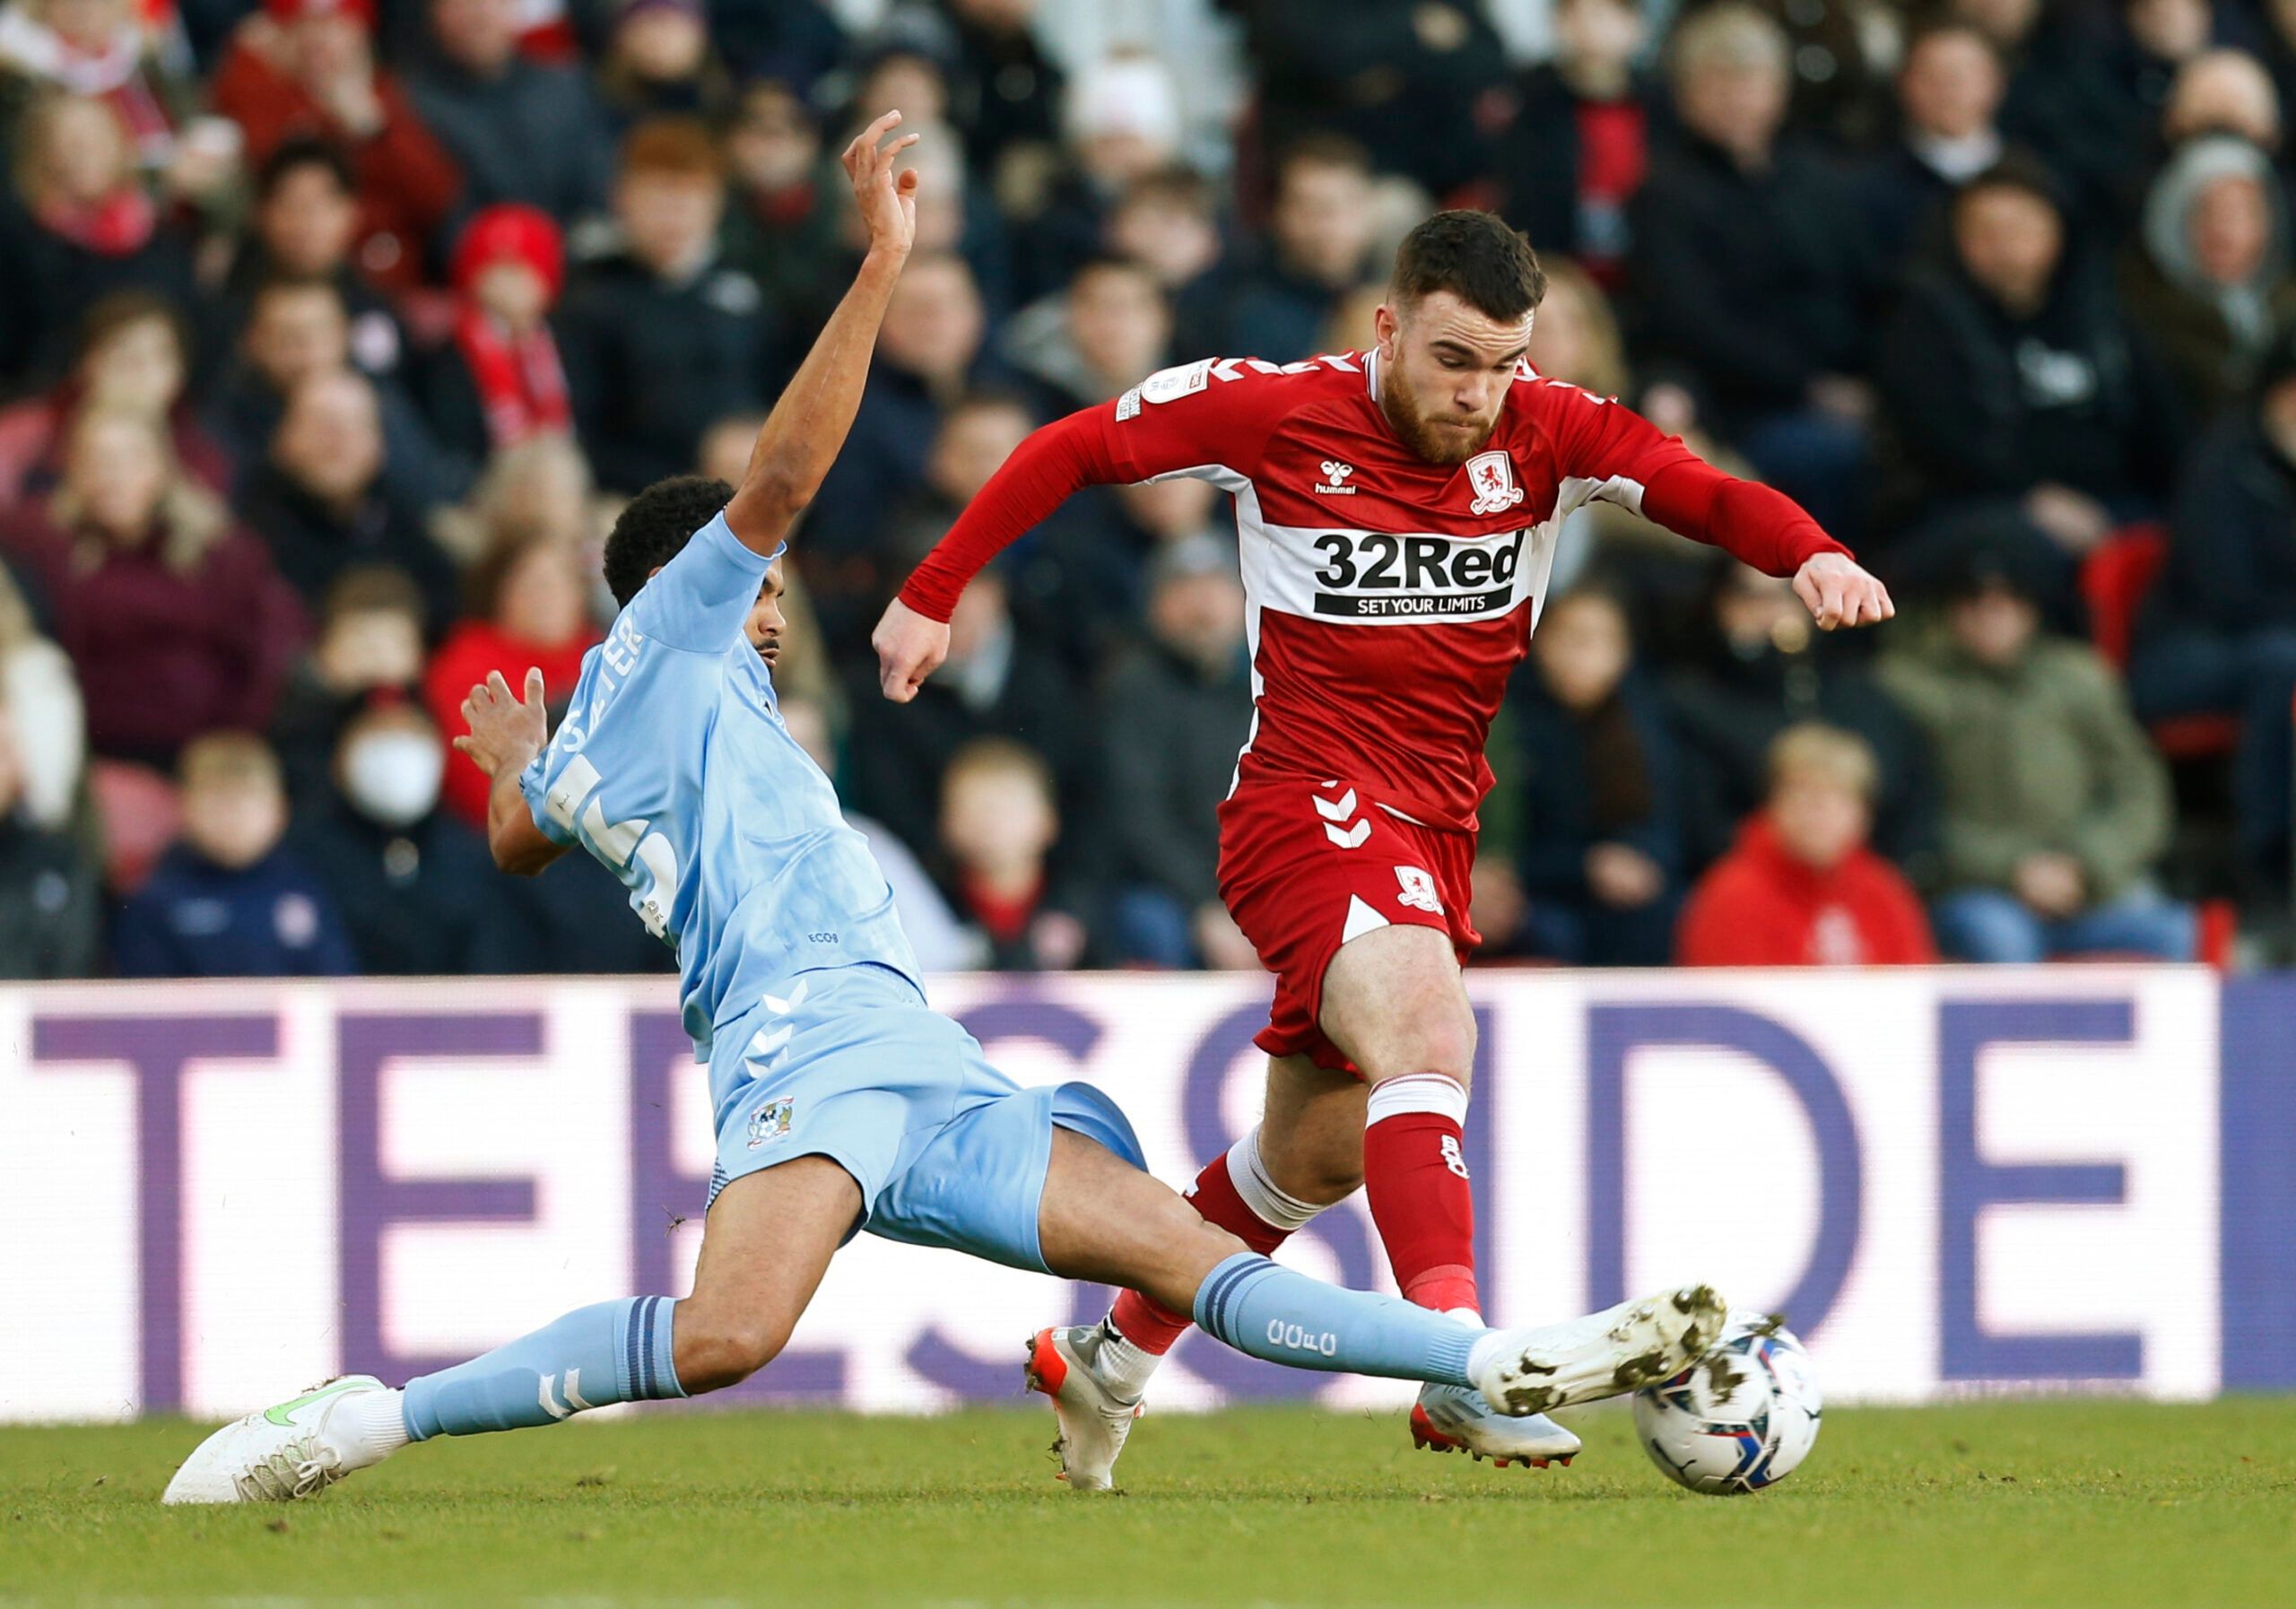 Soccer Football - Championship - Middlesbrough v Coventry City - Riverside Stadium, Middlesbrough, Britain - January 29, 2022 Middlesbrough's Aaron Connolly in action with Coventry City's Jake Clark-Salter Action Images/Ed Sykes EDITORIAL USE ONLY. No use with unauthorized audio, video, data, fixture lists, club/league logos or 'live' services. Online in-match use limited to 75 images, no video emulation. No use in betting, games or single club /league/player publications.  Please contact your a